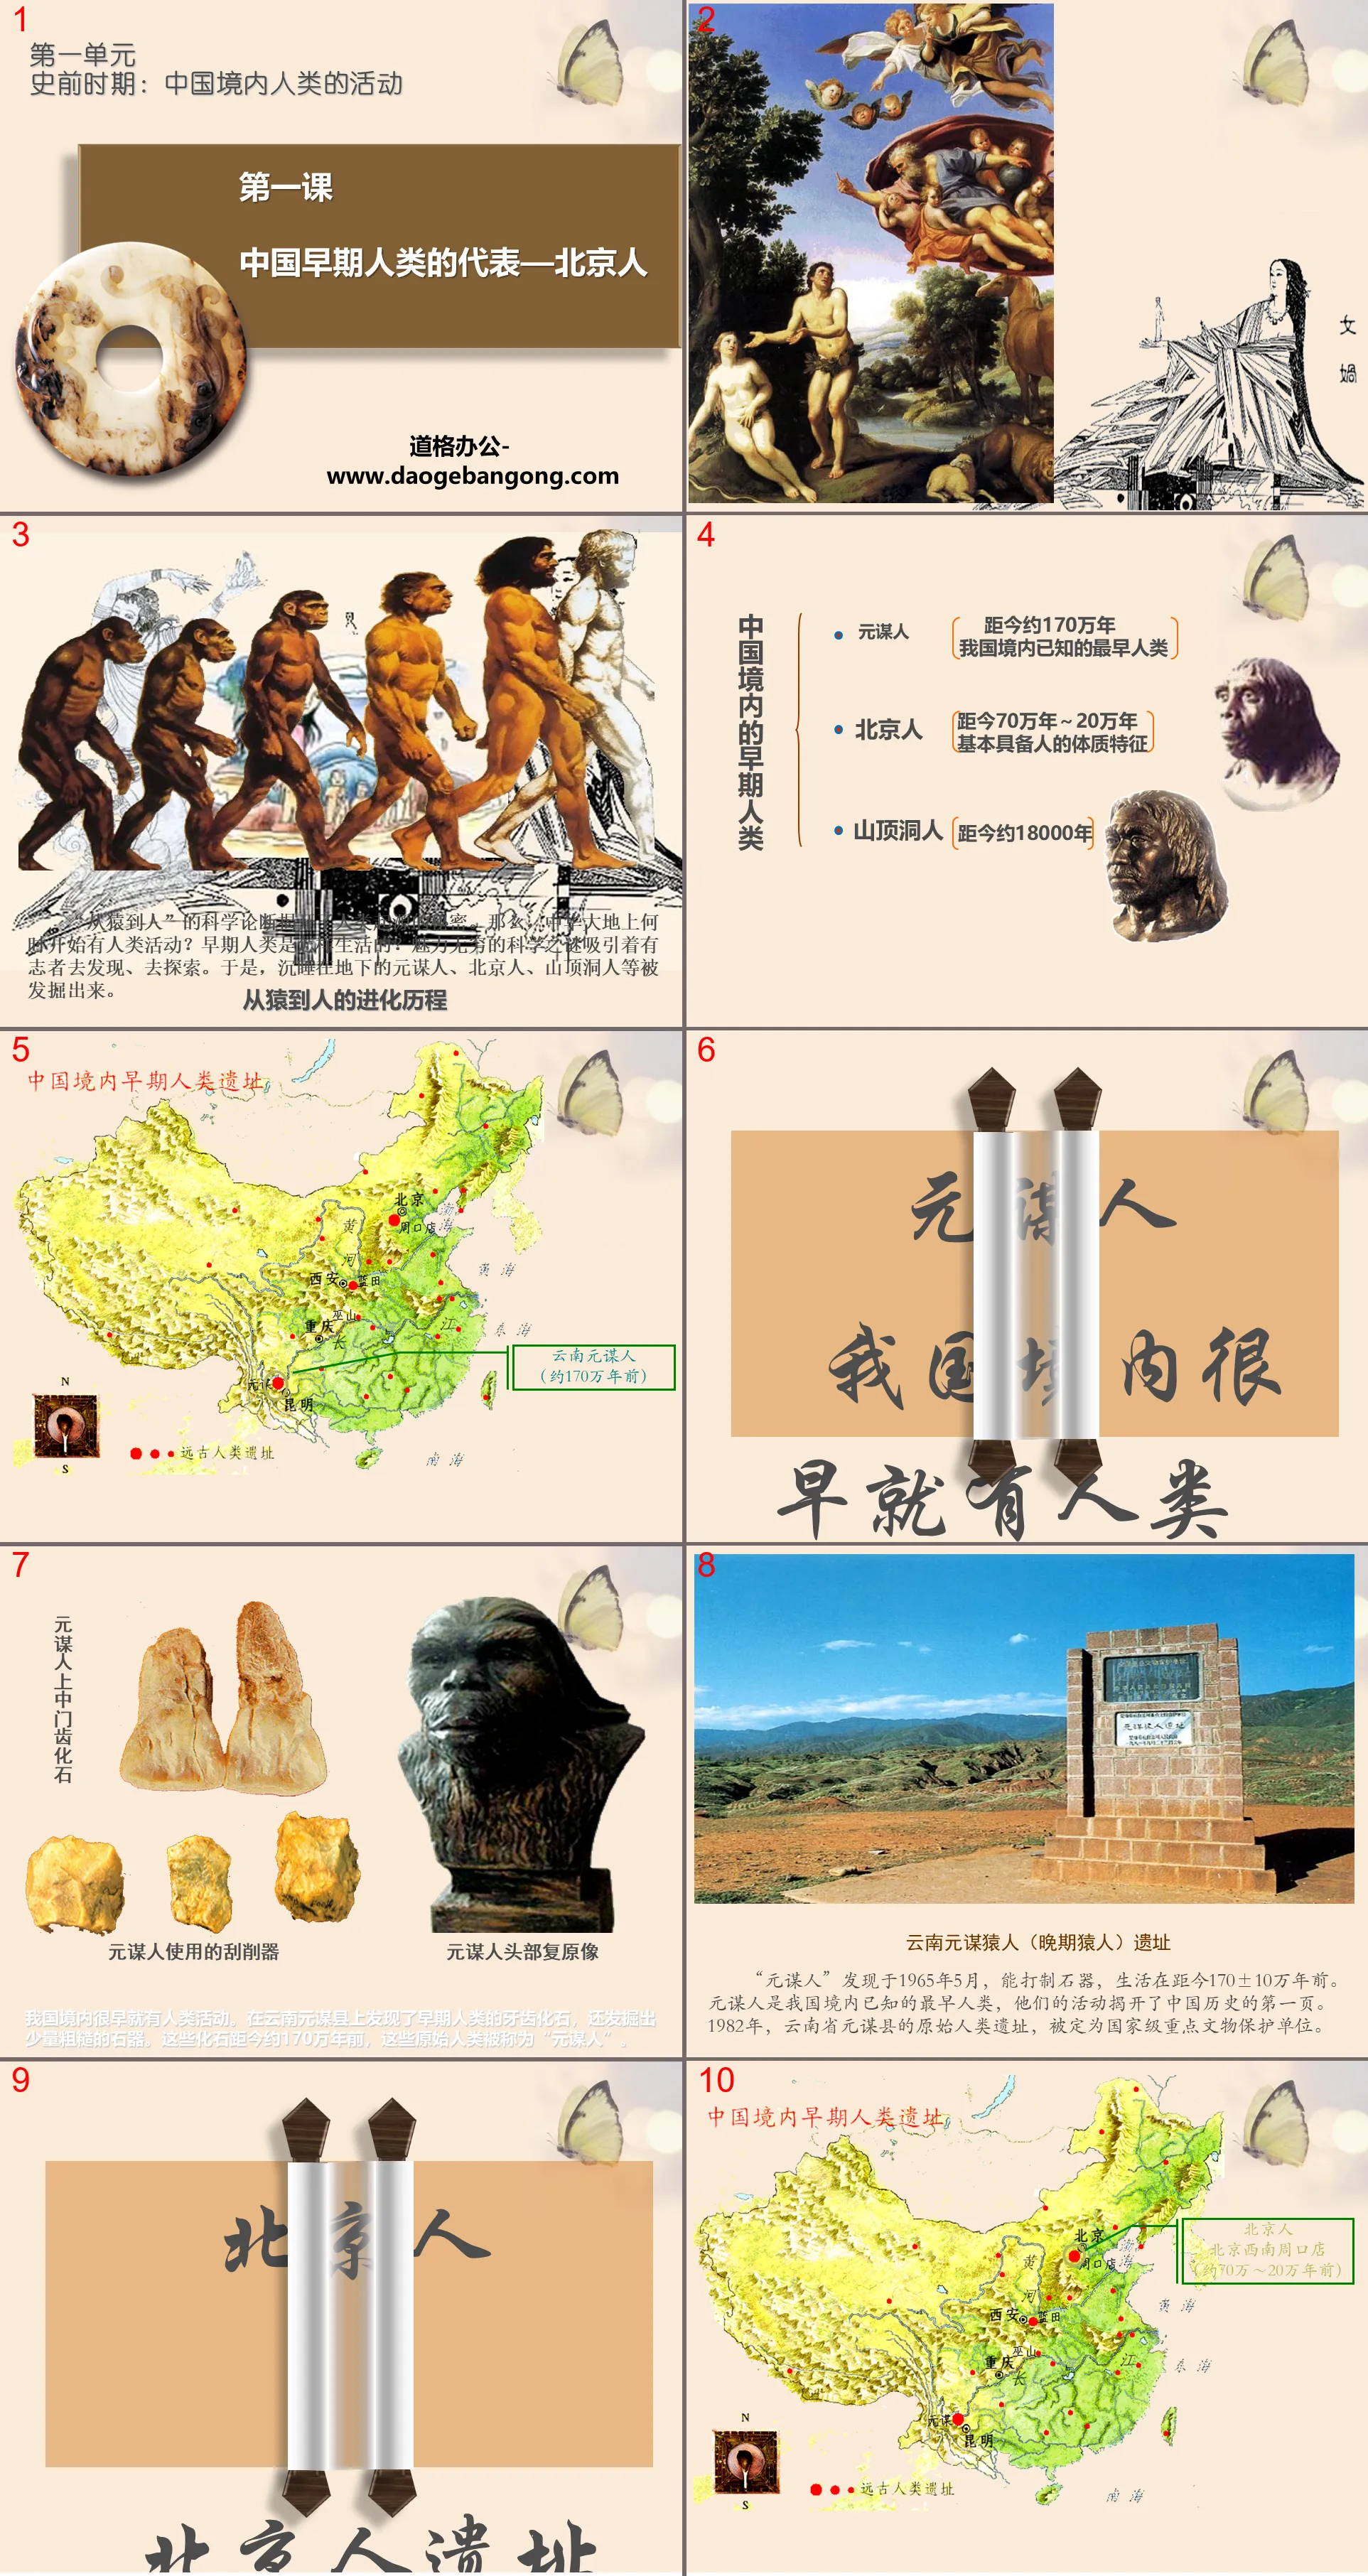 "Representatives of Early Humans in China—Peking Man" PPT courseware